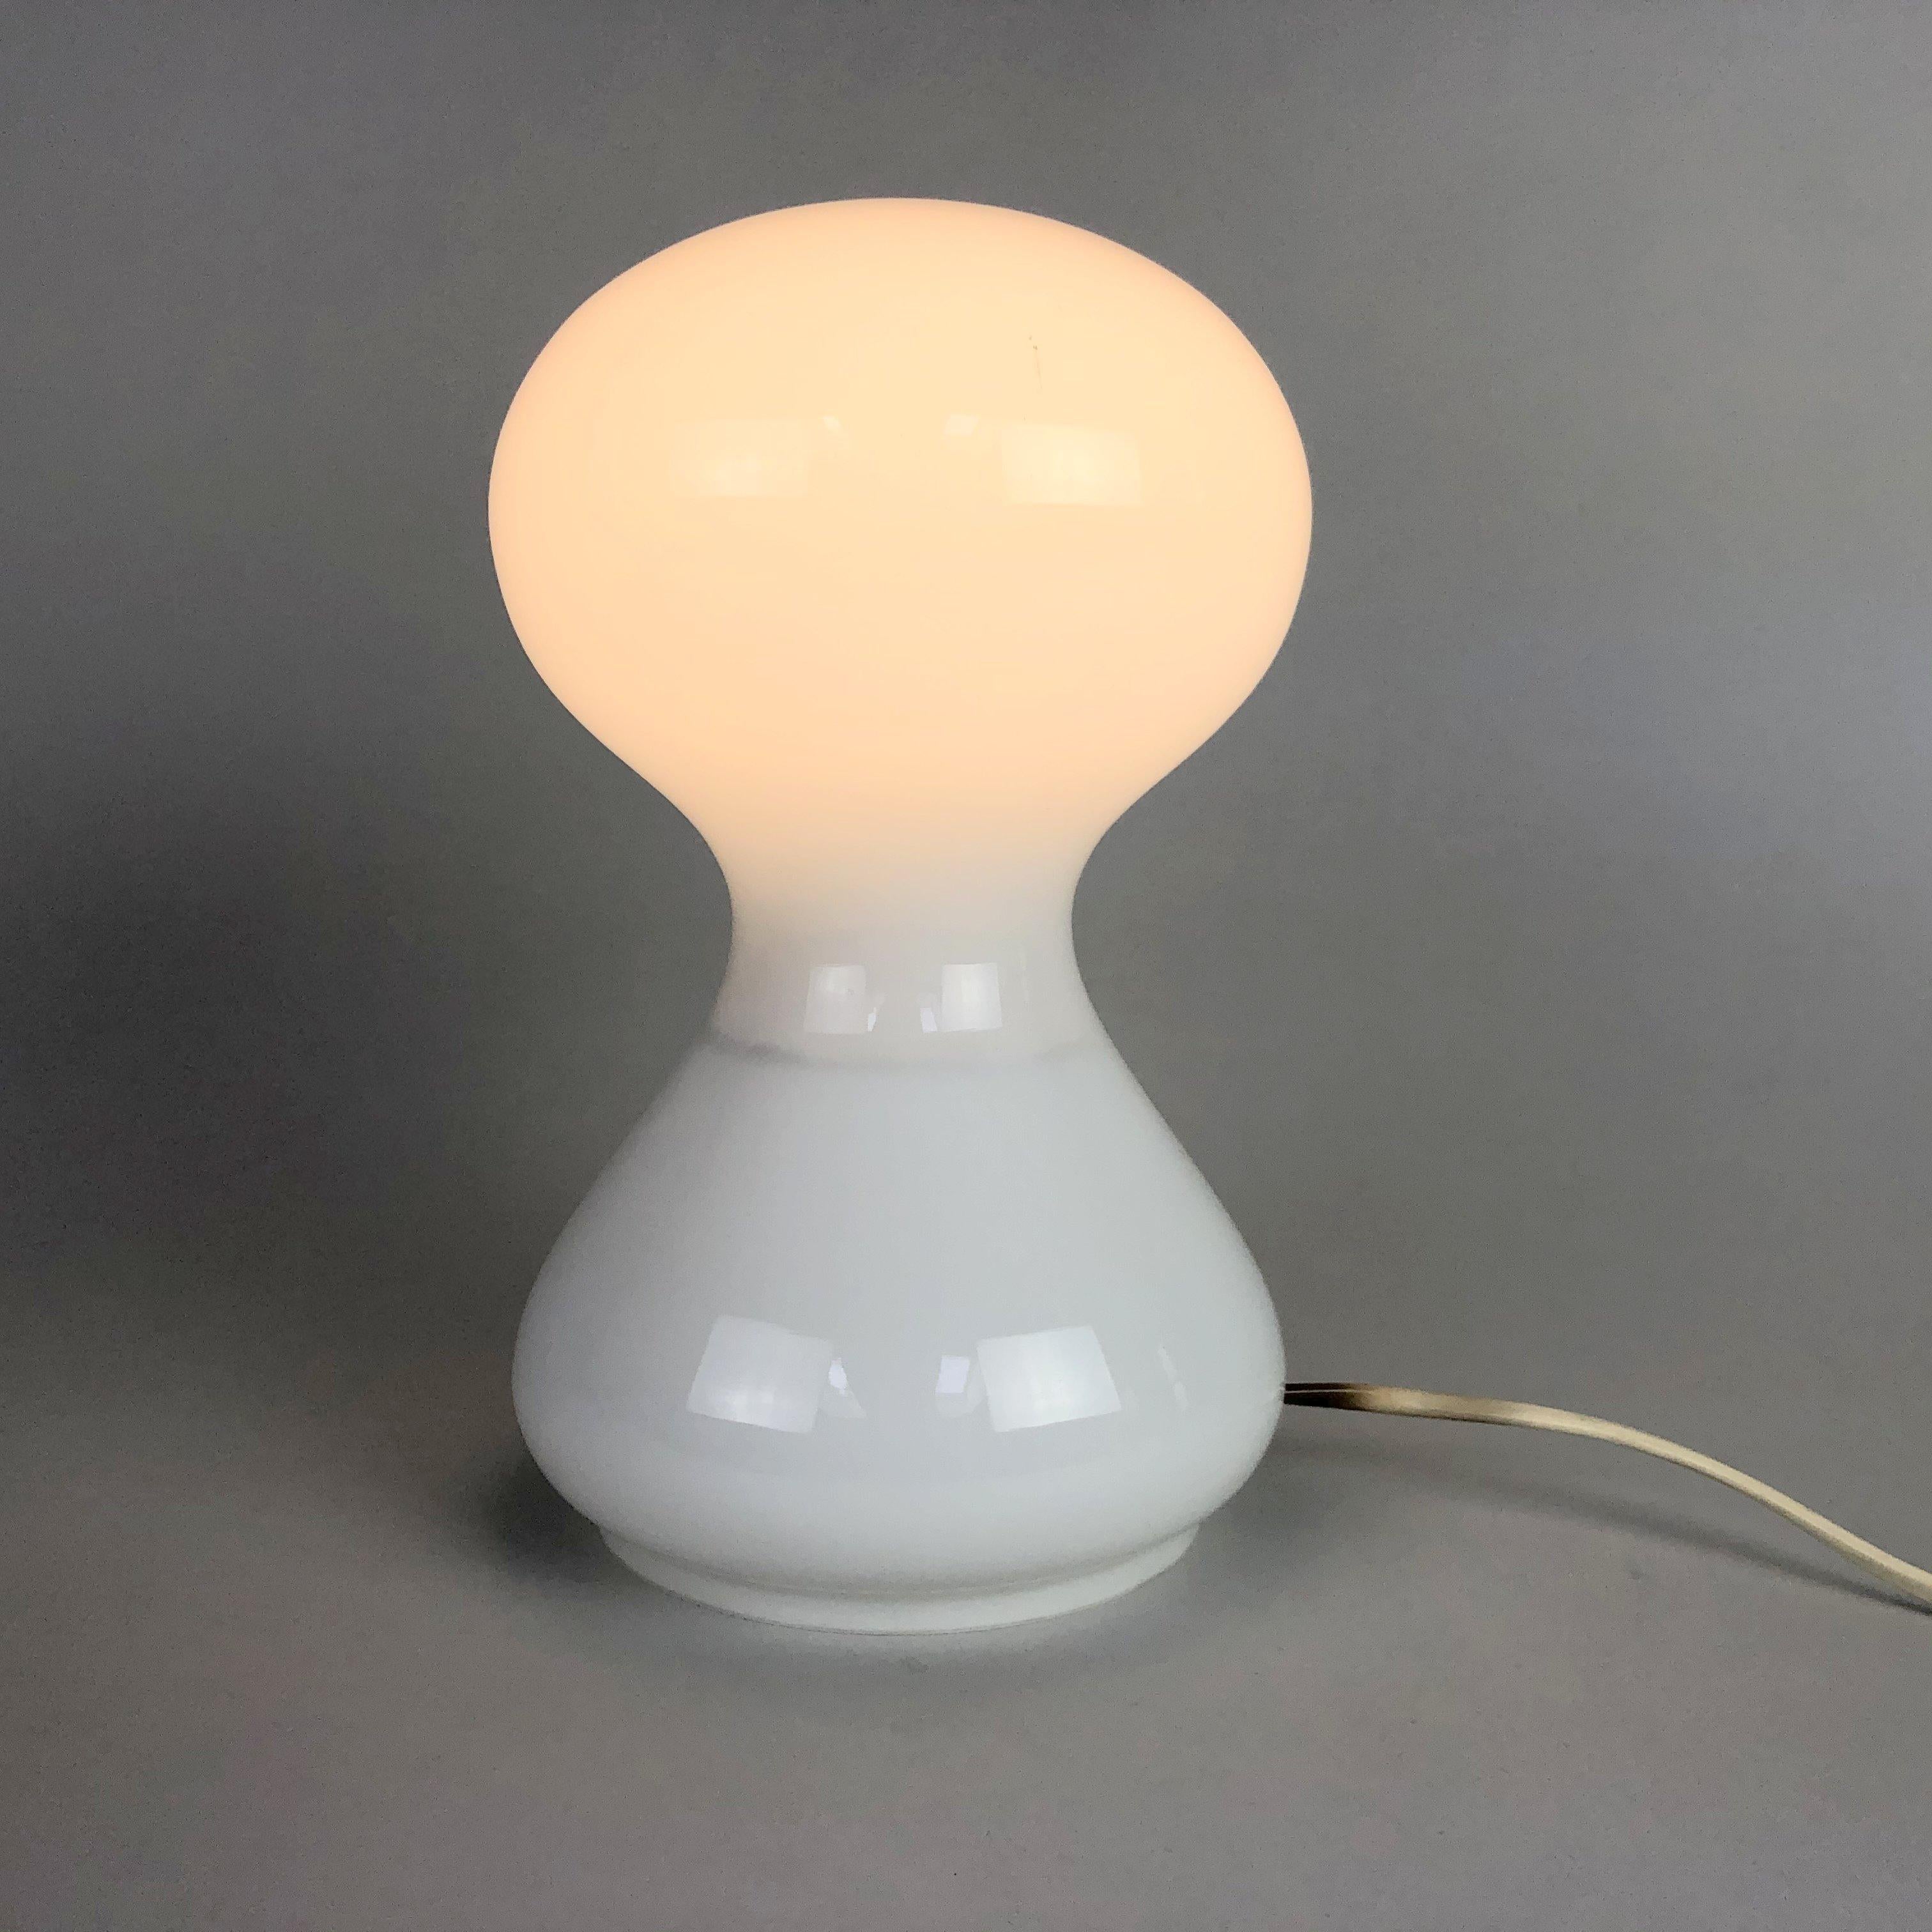 Midcentury table lamp designed by Ivan Jakes and produced by Osvetlovaci n.p. Valasske Mezirici in Czechoslovakia in 1970s. Original, fully functional wiring.